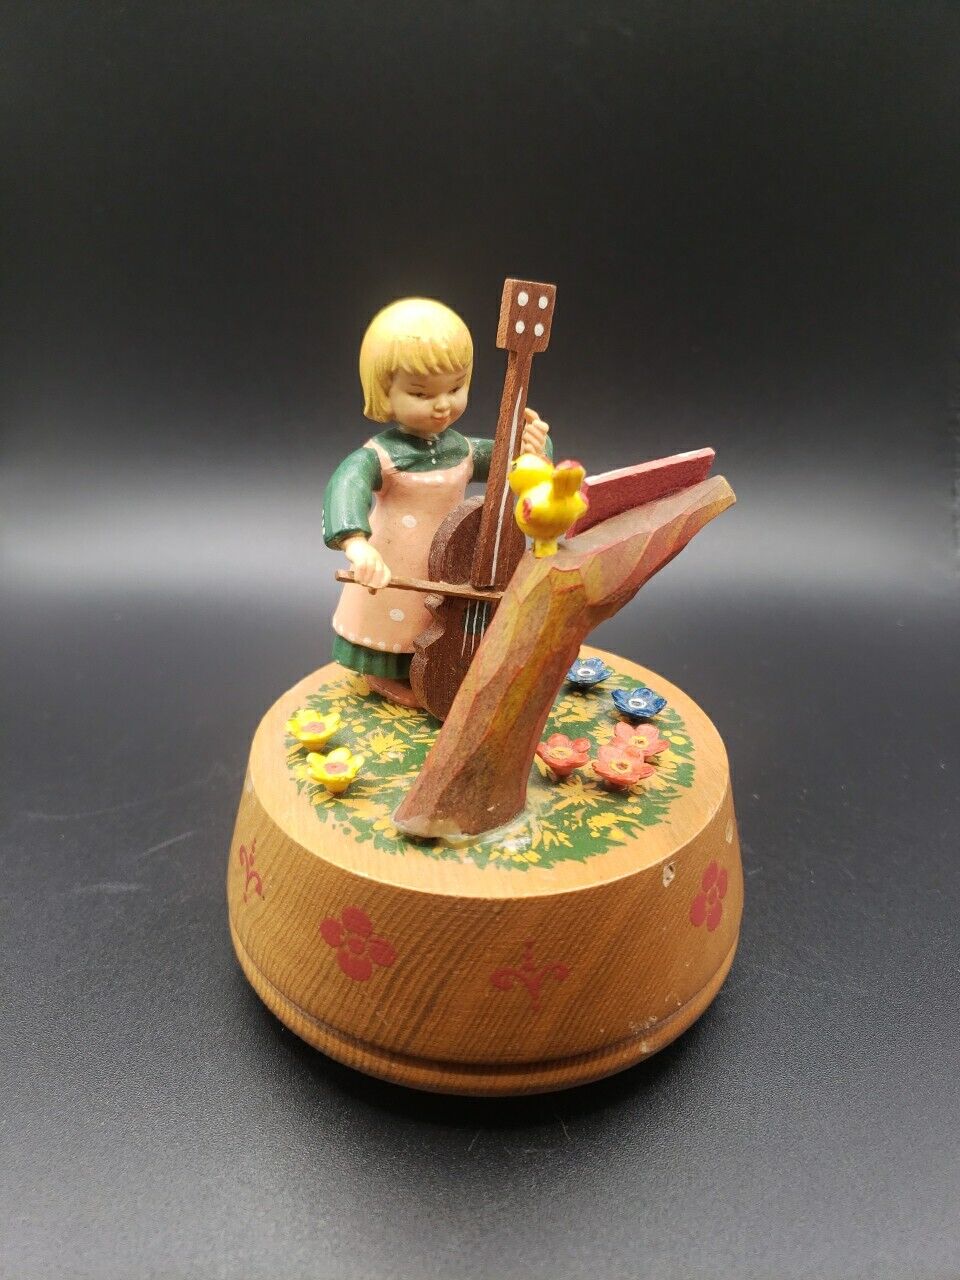 Anri Hand Painted Wooden Music Box Plays Sing A Song Rotates Vintage Italy